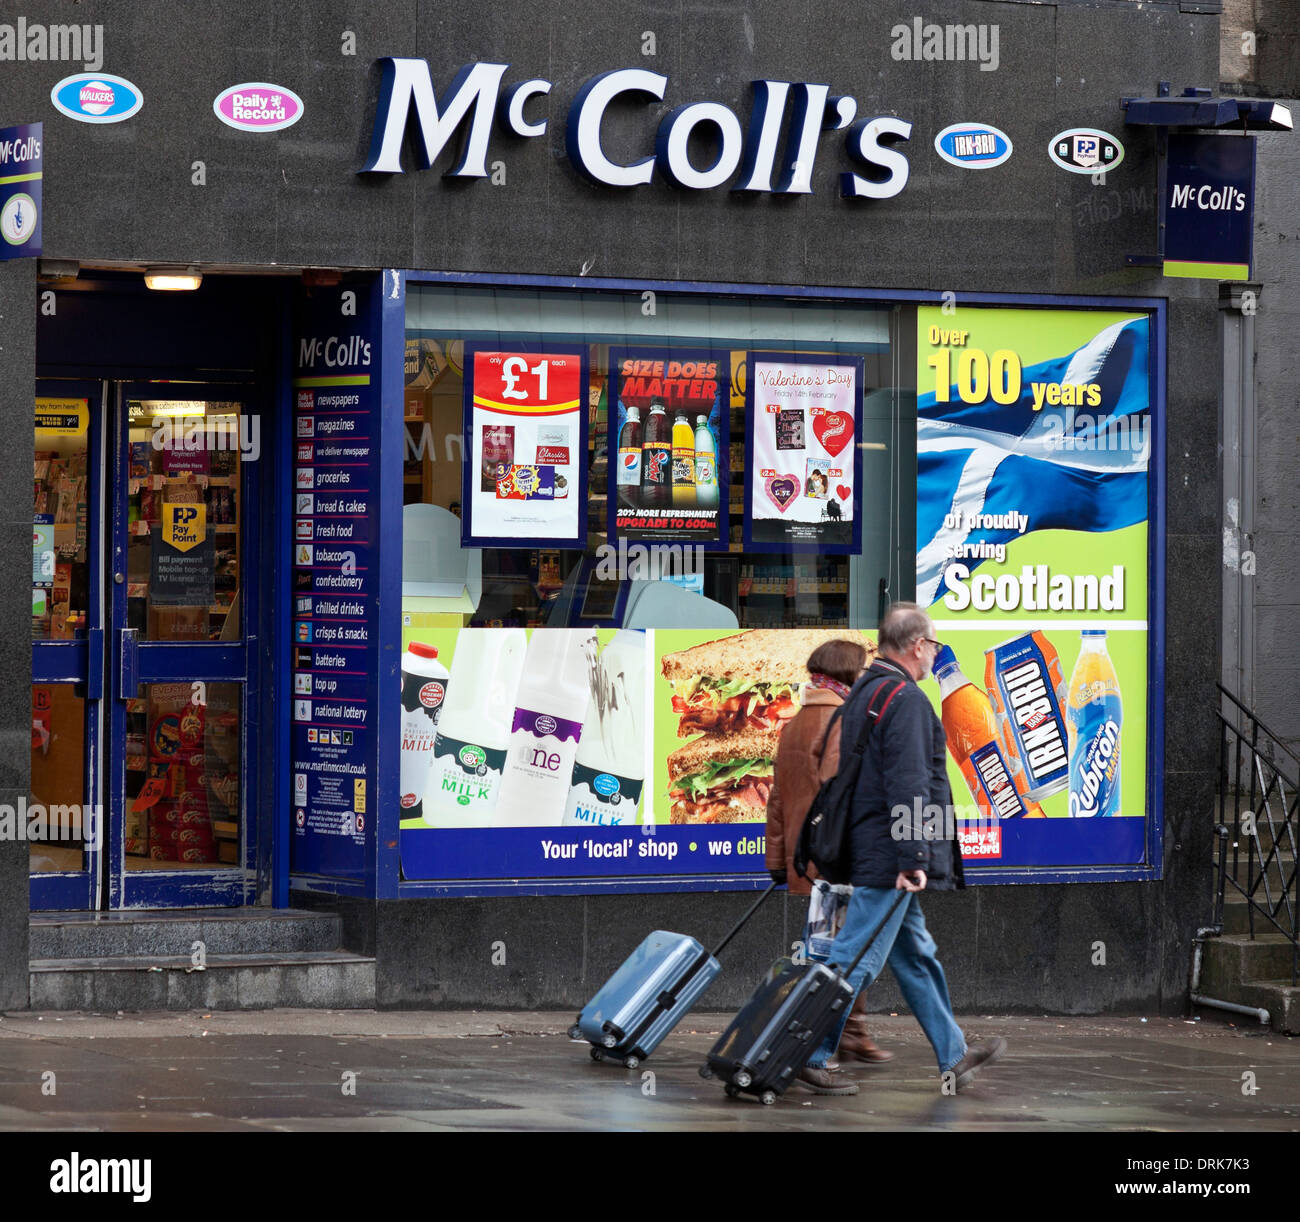 McColl's, R. S. Mcoll's store, Frederick Street, Edinburgh Scotland UK Banque D'Images